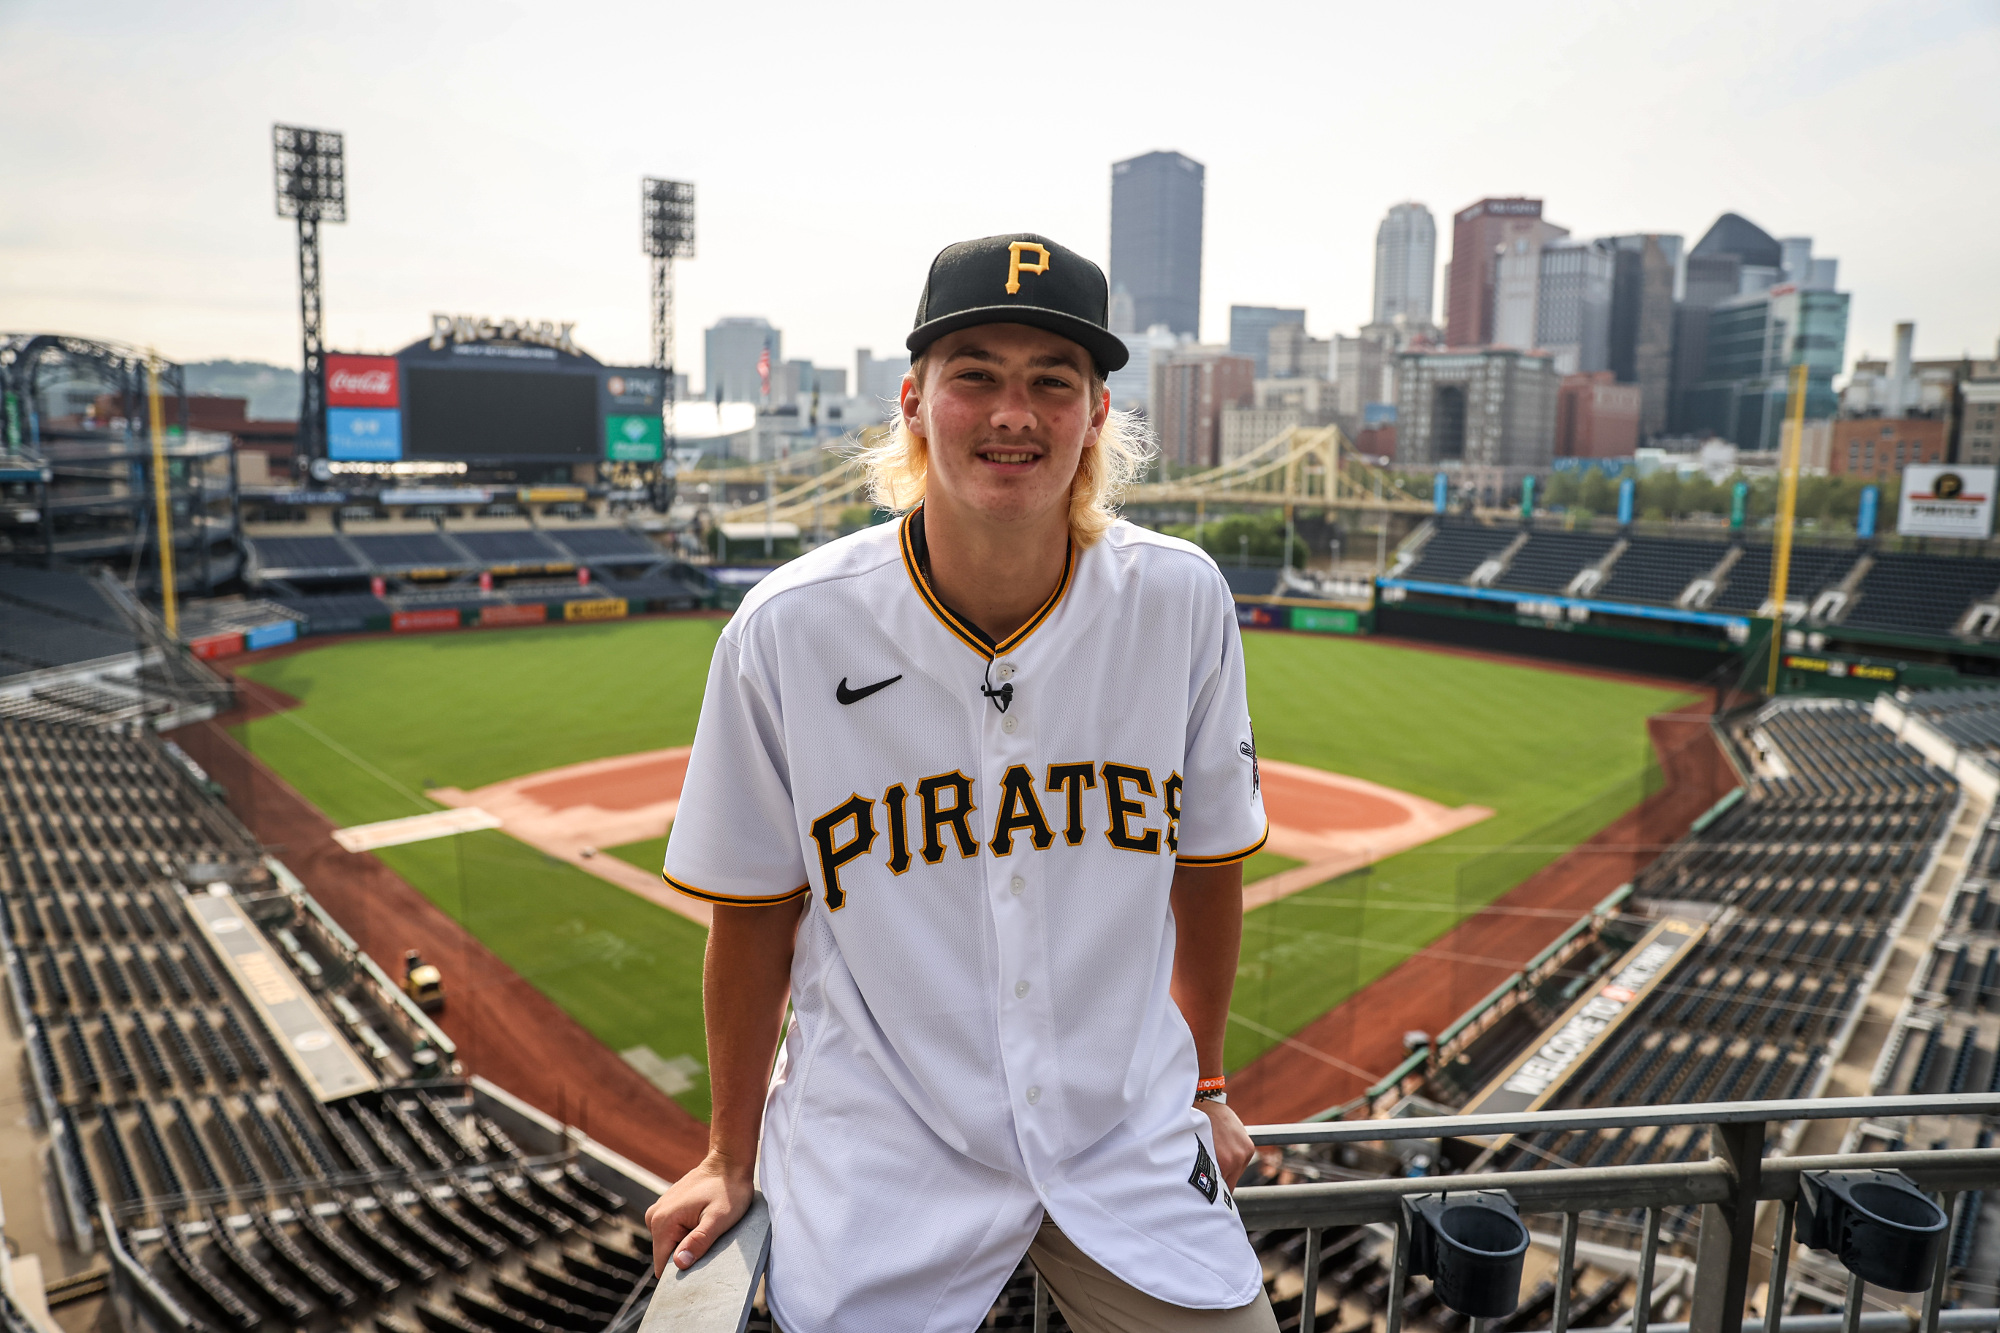 Highlights from the Pirates Pitchers on the Extended Spring Training Roster